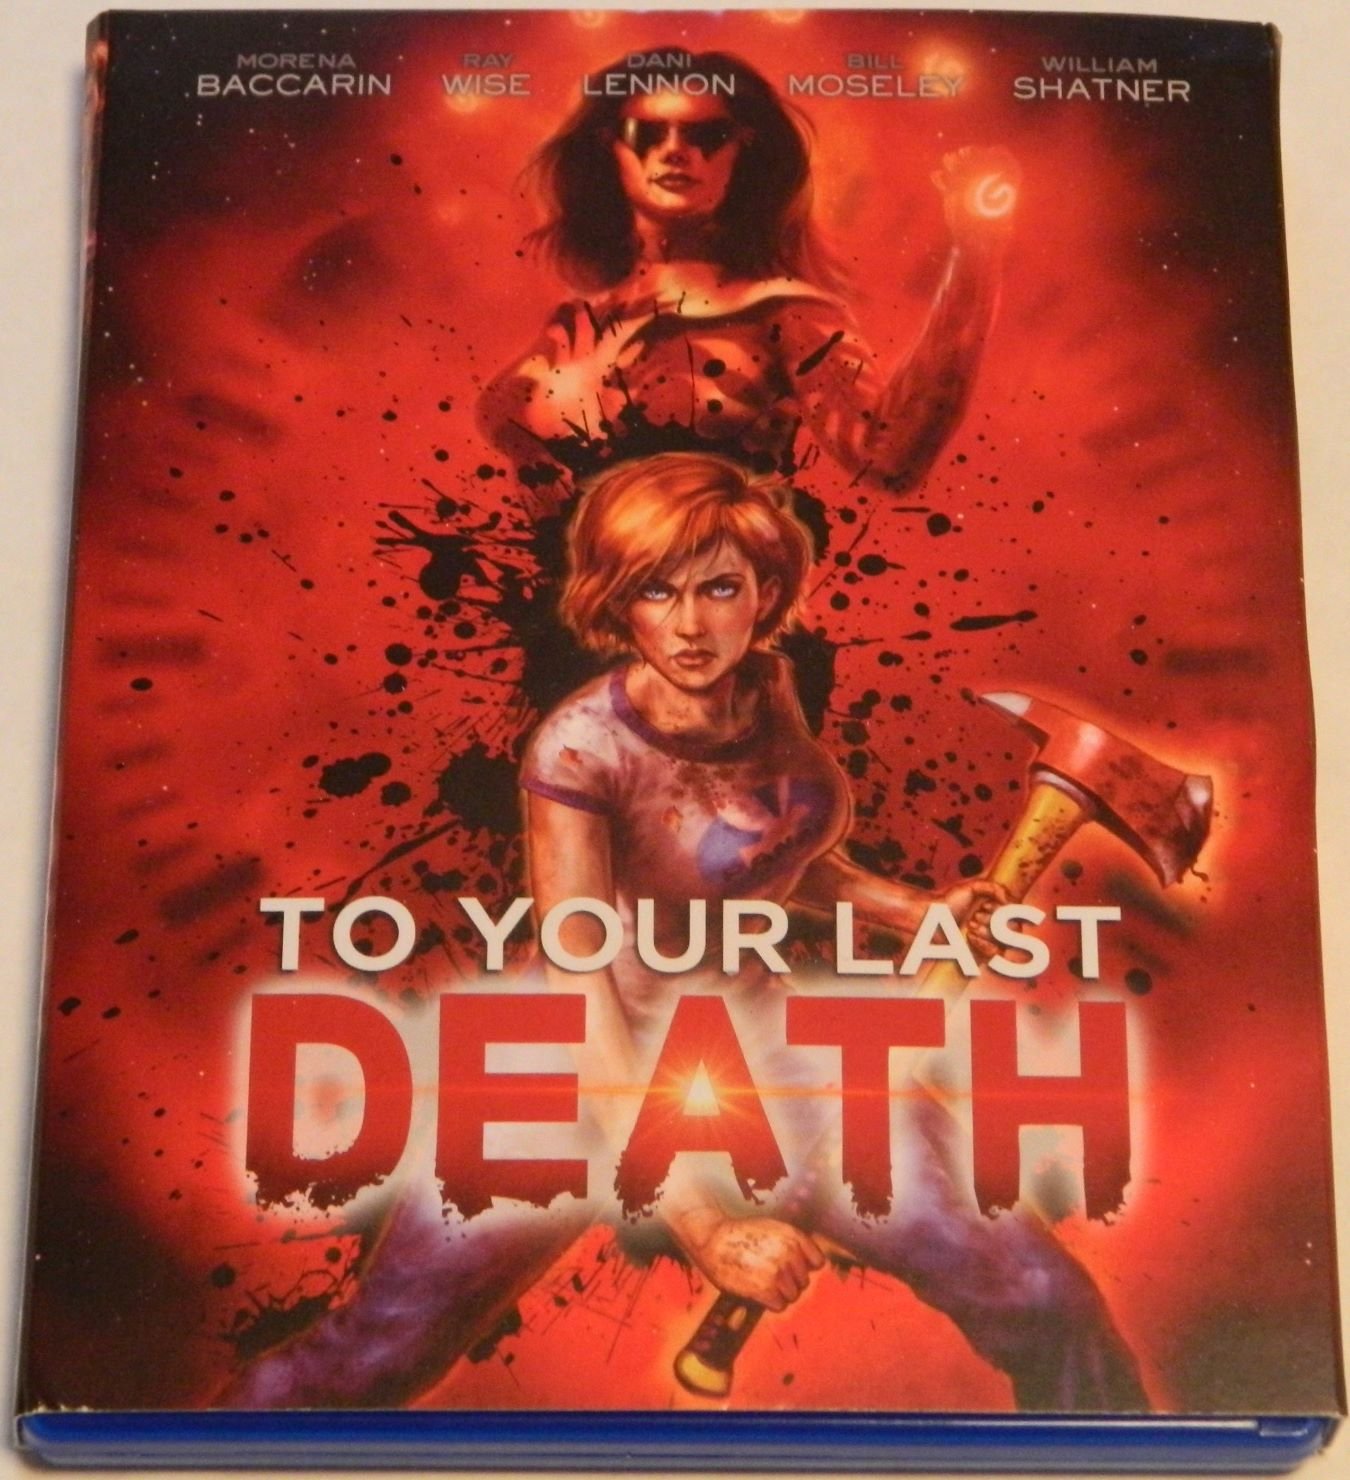 To Your Last Death Blu-ray Review